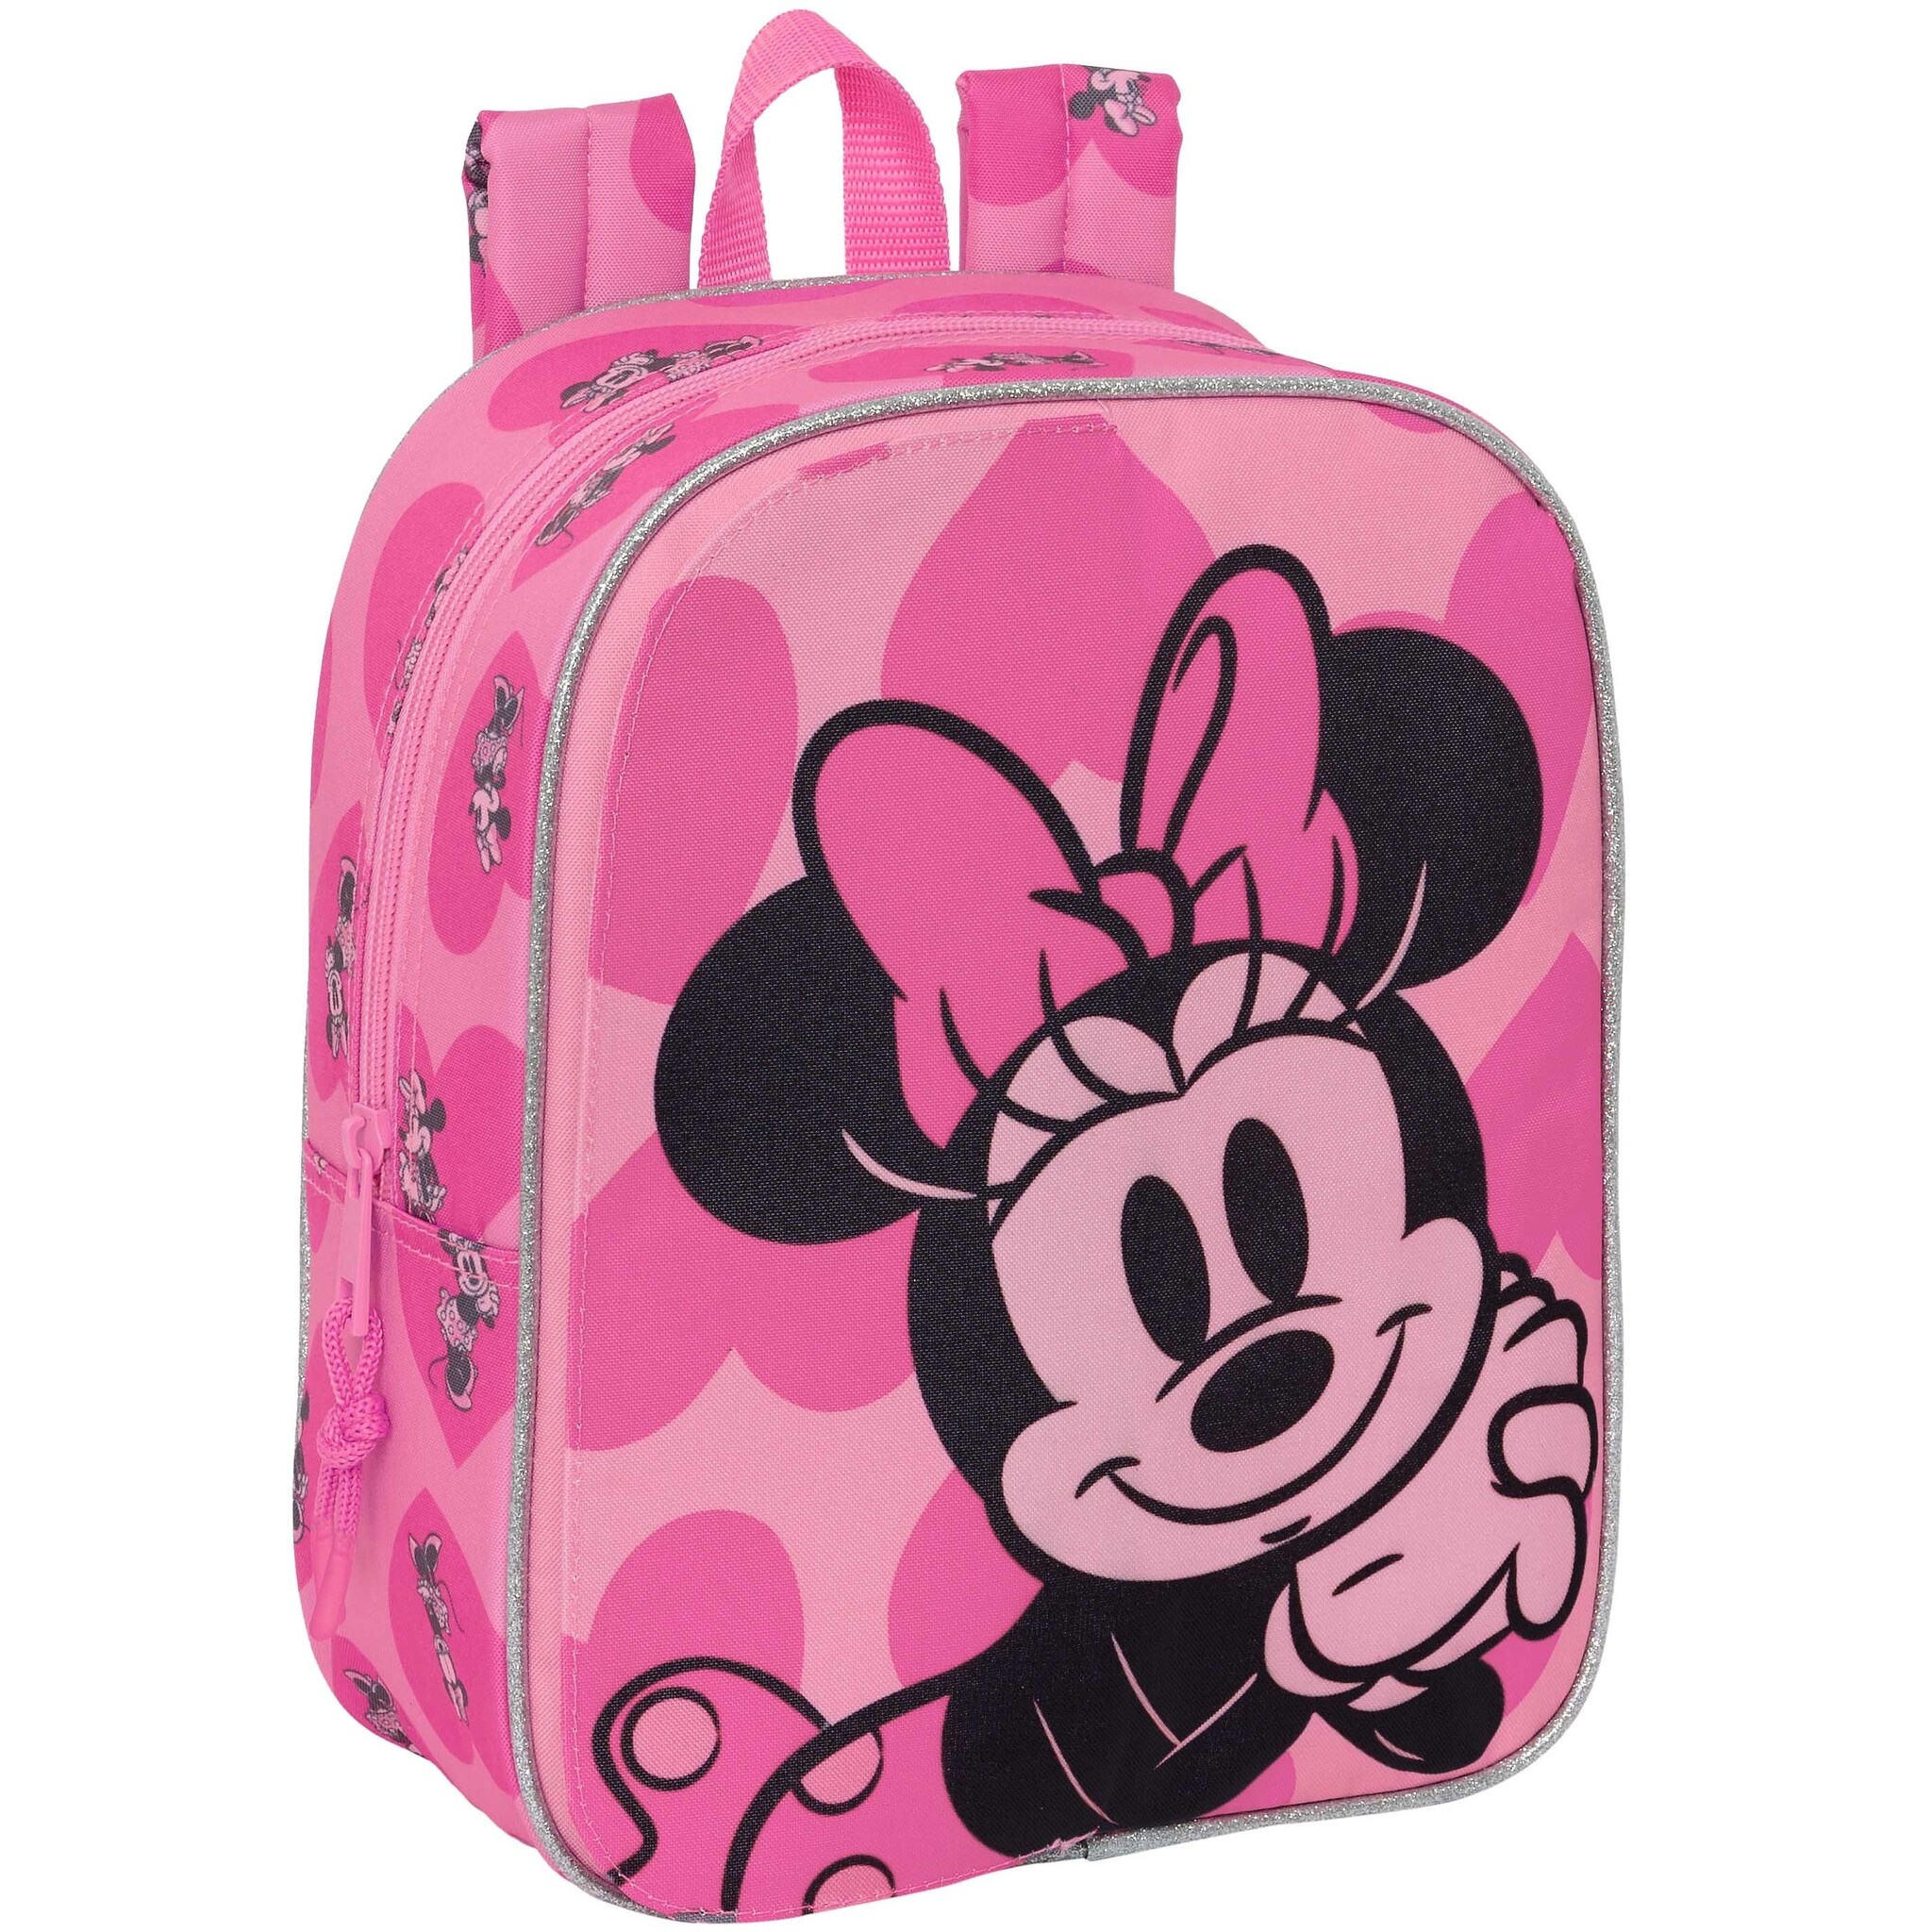 Disney Minnie Mouse Toddler backpack, Loving - 27 x 22 x 10 cm - Polyester